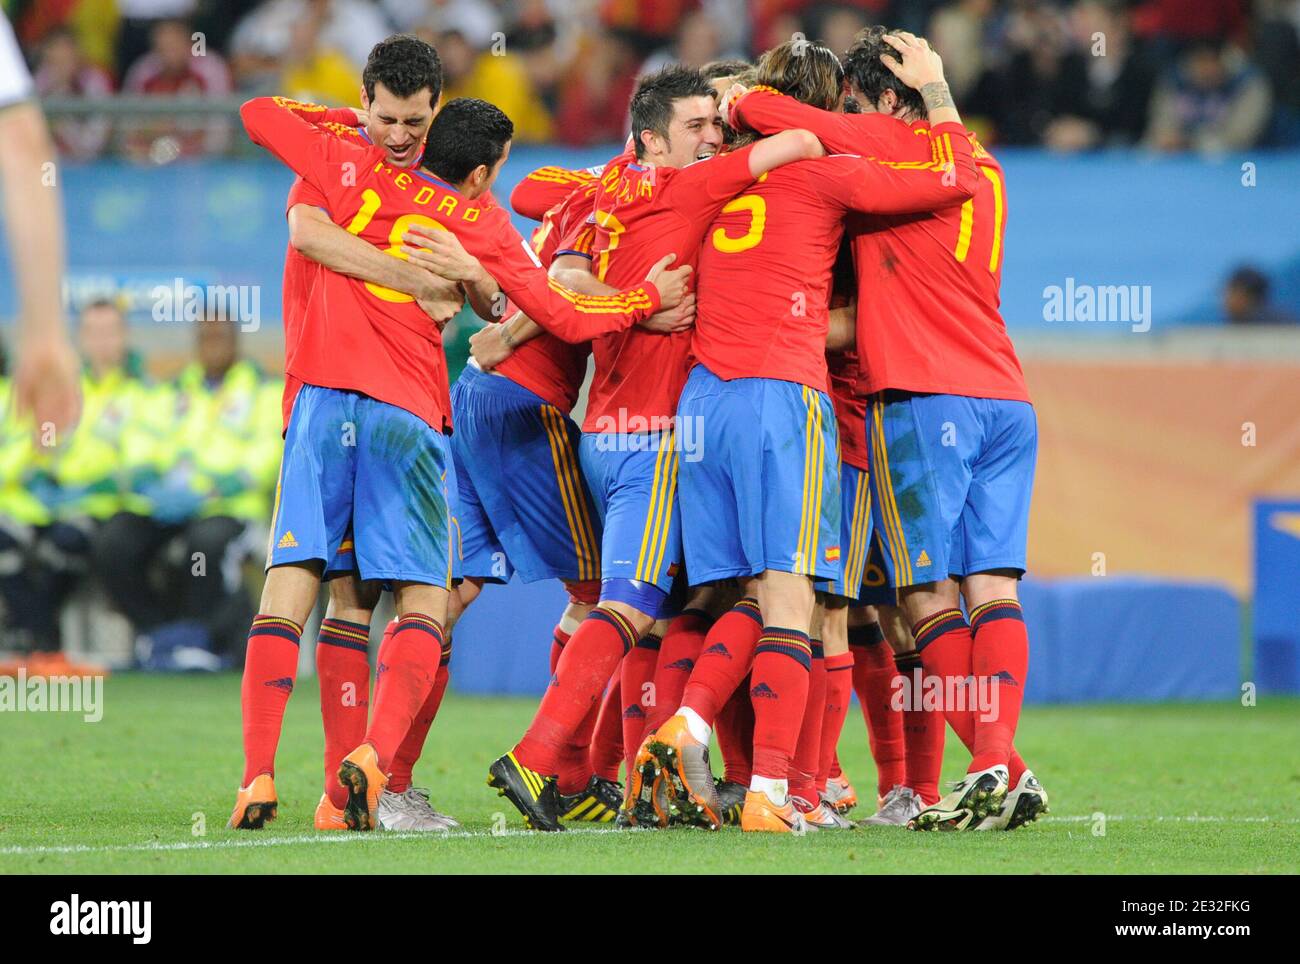 Spain's players celebrate after Carles Puyol scored the 1-0 goal during the 2010 FIFA World Cup South Africa, Semi-Final, Soccer match, Spain vs Germany at Moses Mabhida football stadium in Durban, South Africa on July 7th, 2010. Spain won 1-0. Photo by Henri Szwarc/ABACAPRESS.COM Stock Photo